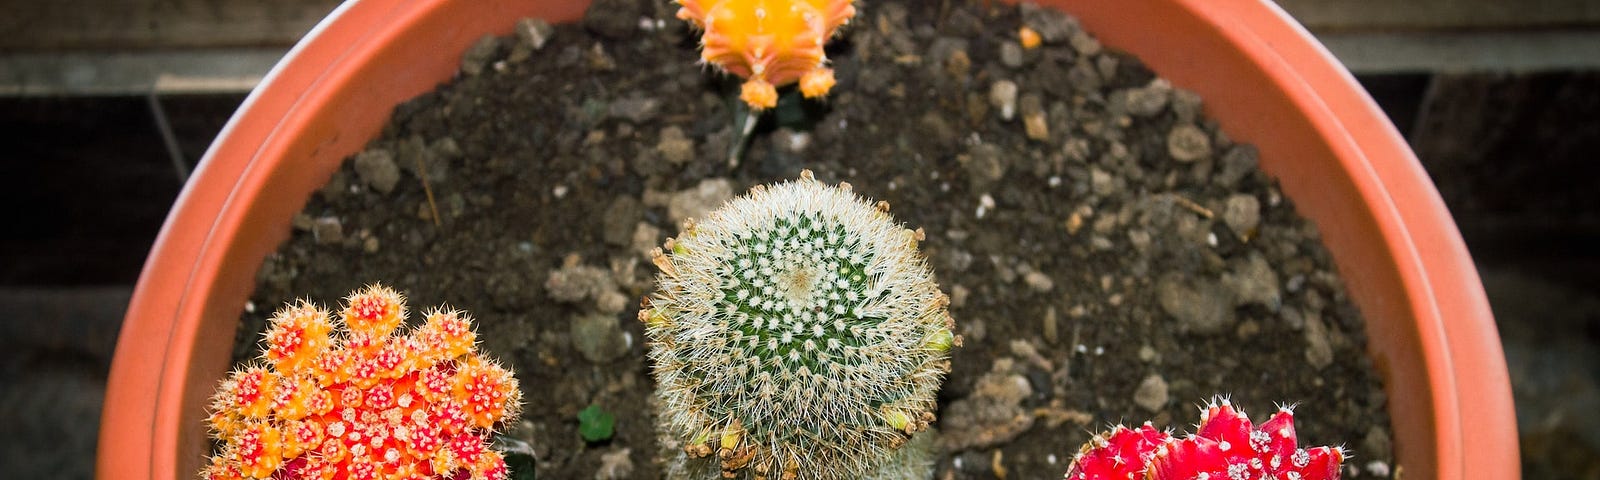 cactus flowers in a pot